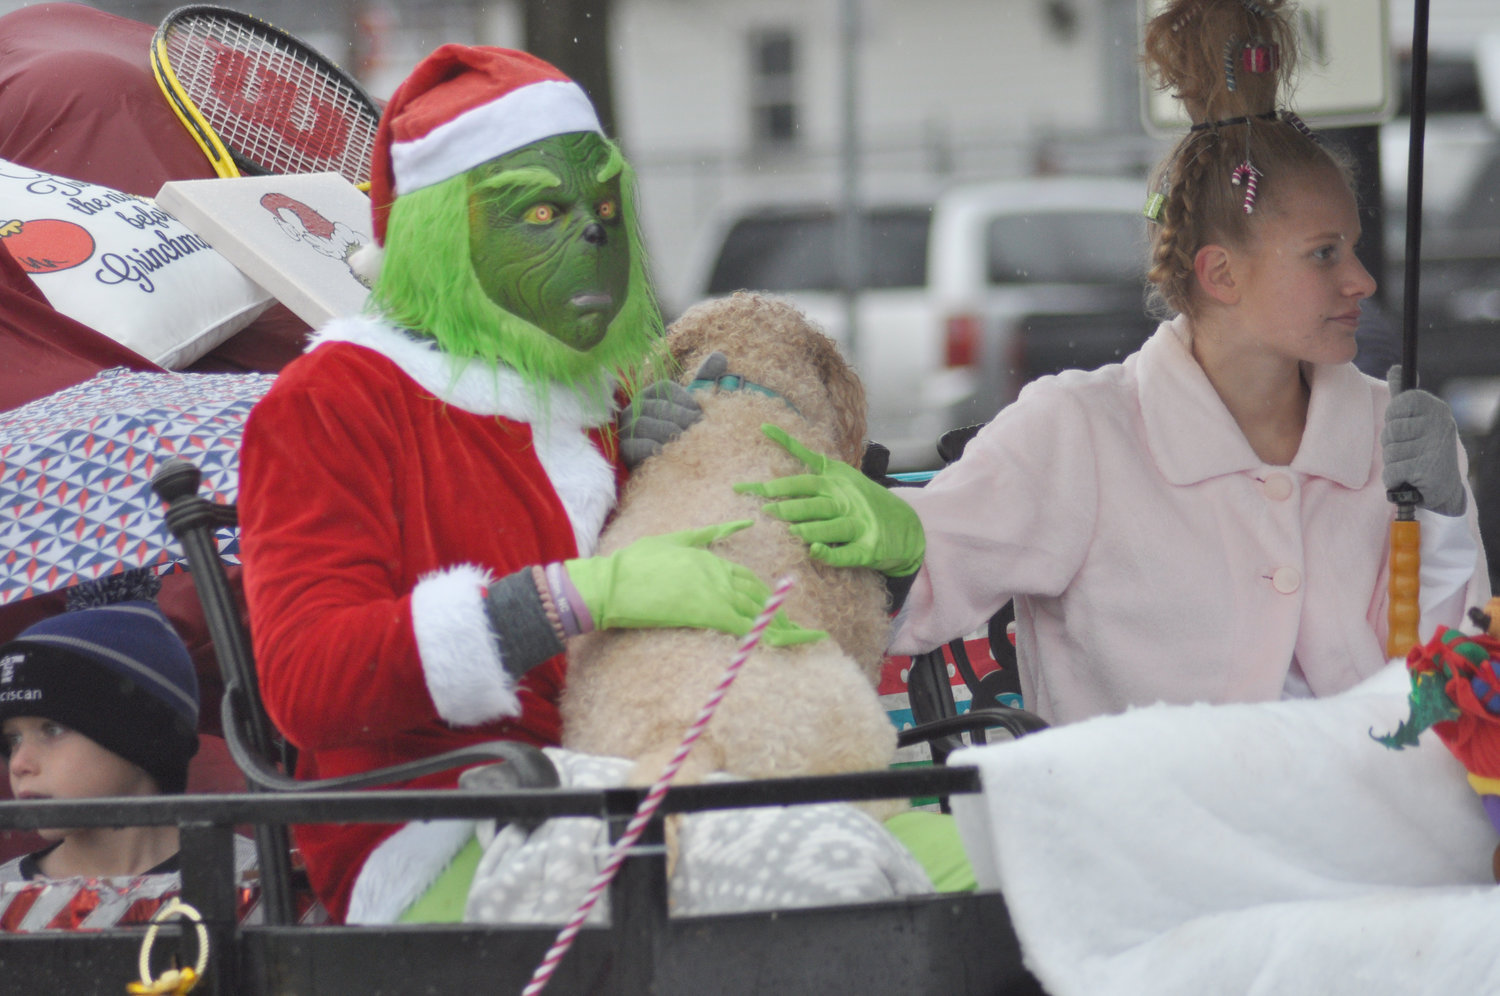 The Grinch rides in the 2019 Christmas Parade in downtown Crawfordsville. This year's parade has been canceled due to the COVID-19 pandemic.